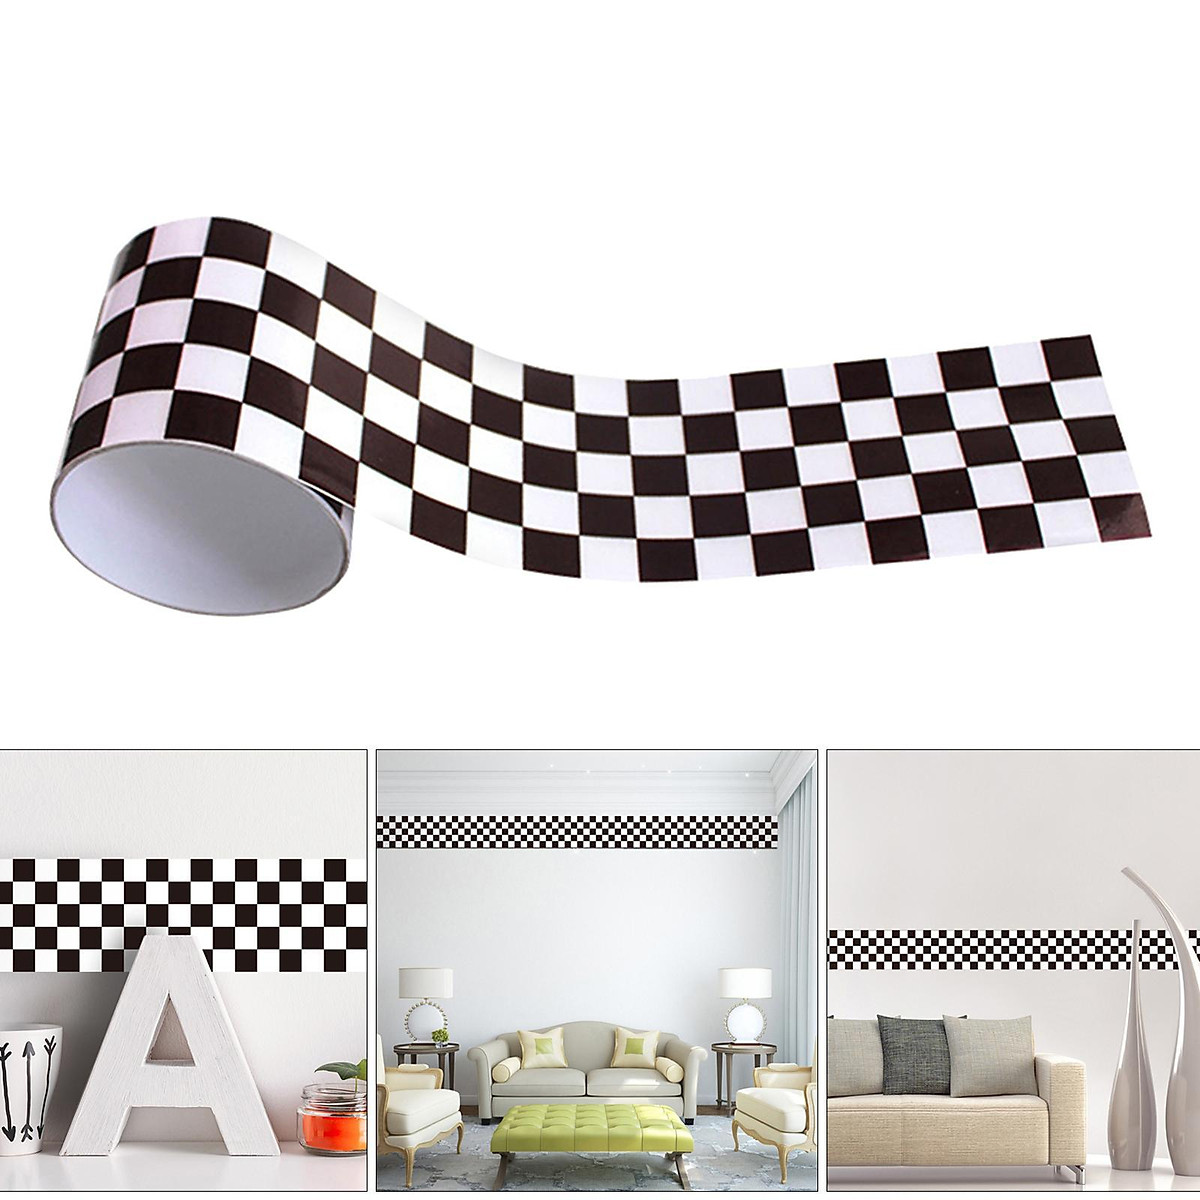 5xBlack White Grid Mosaic Wall Decal Wall Sticker Living Room Bedroom Wall  Art